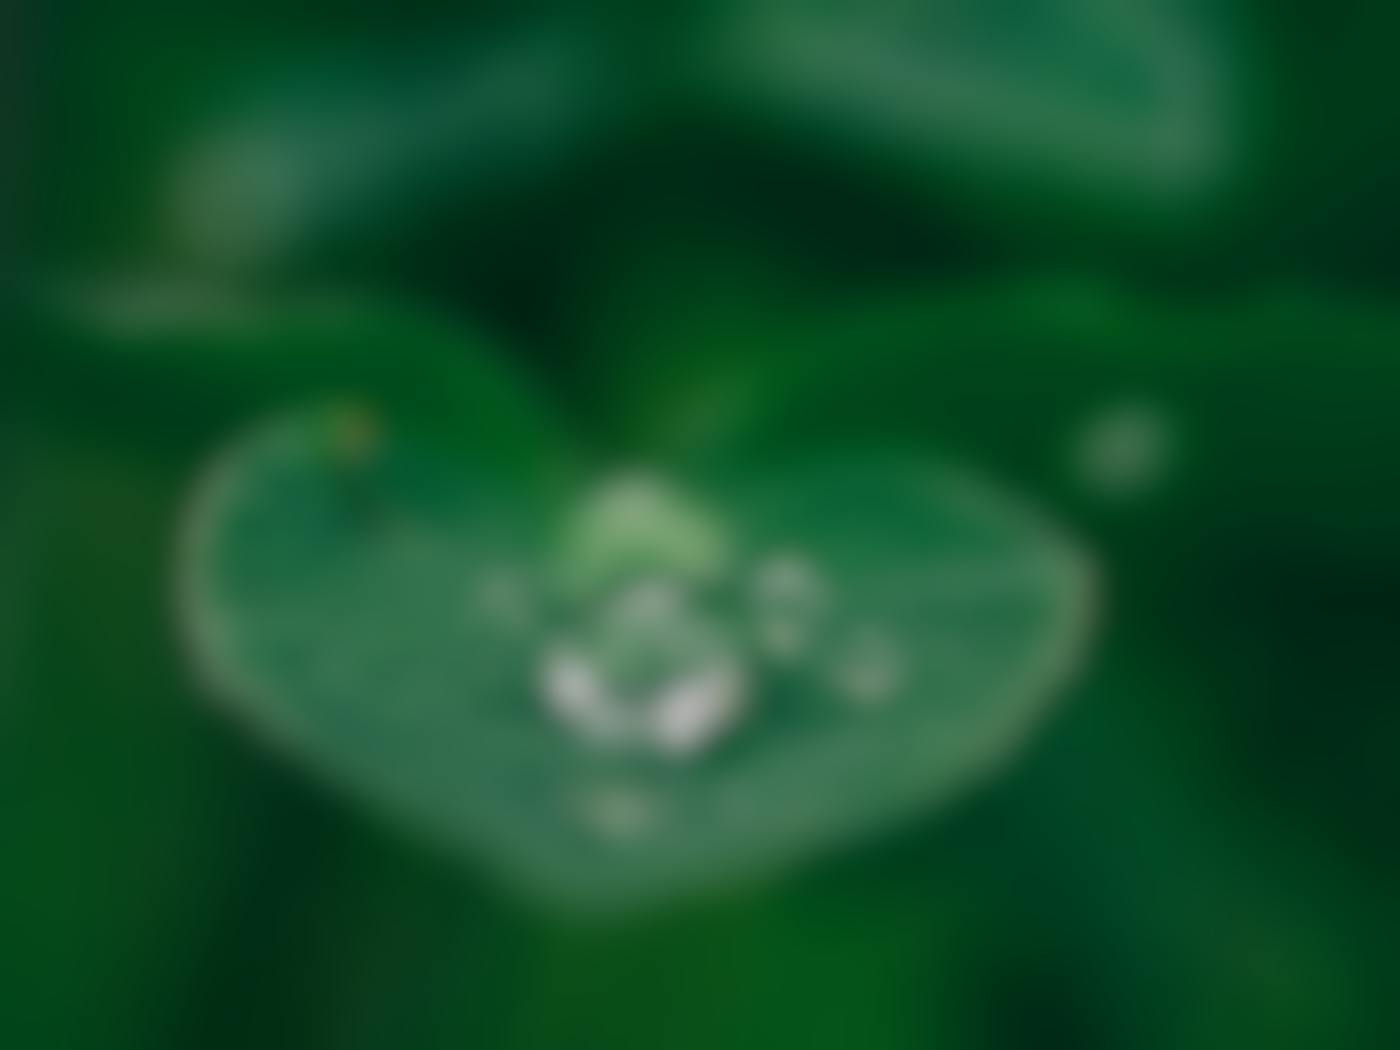 A green leaf with a water droplet on it